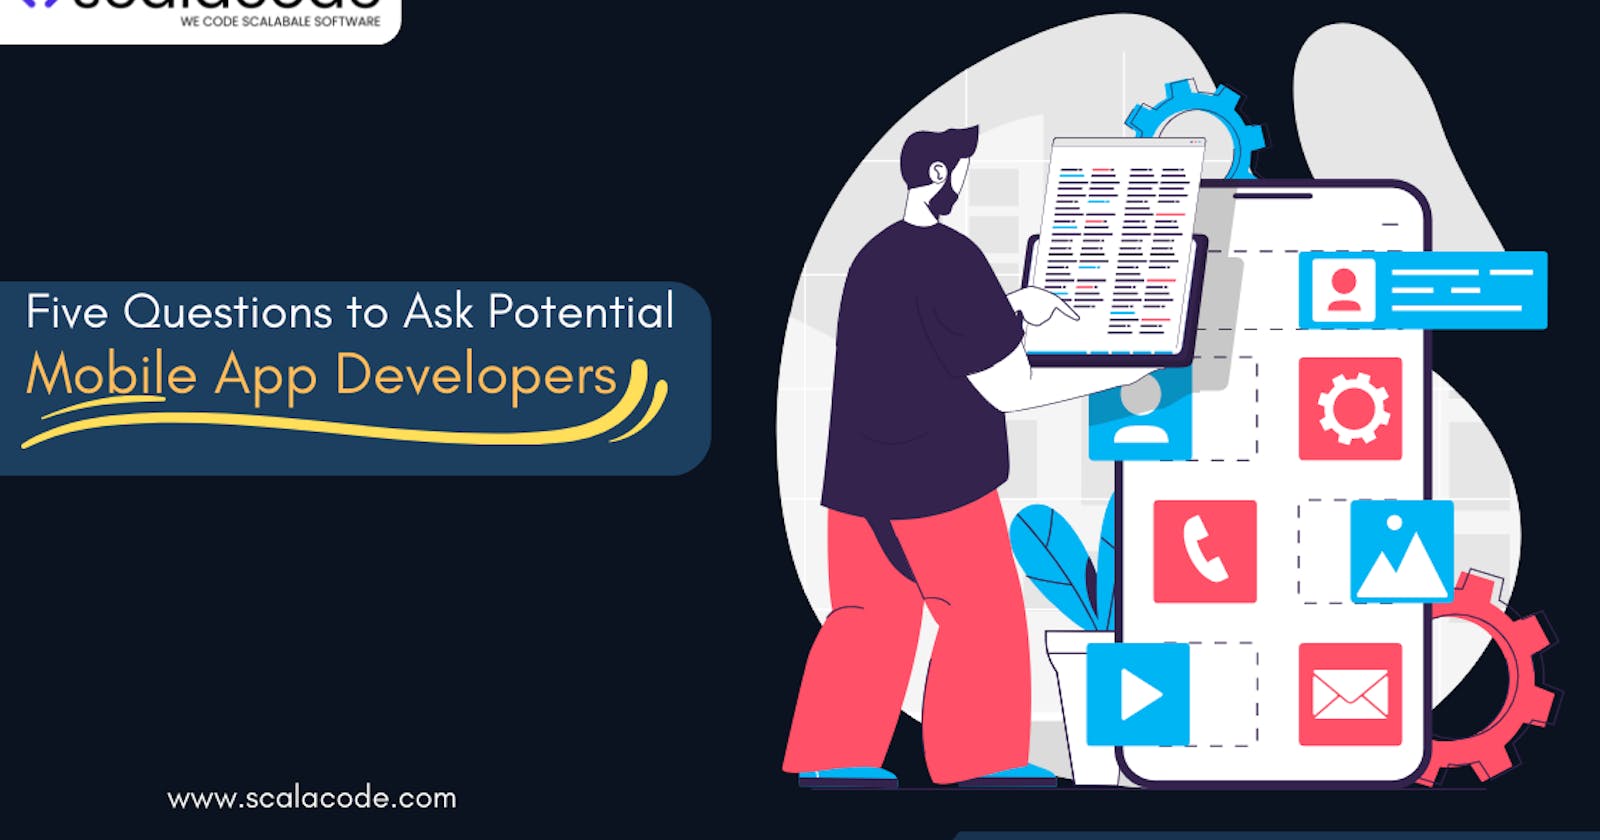 Five Questions to Ask Potential Mobile App Developers